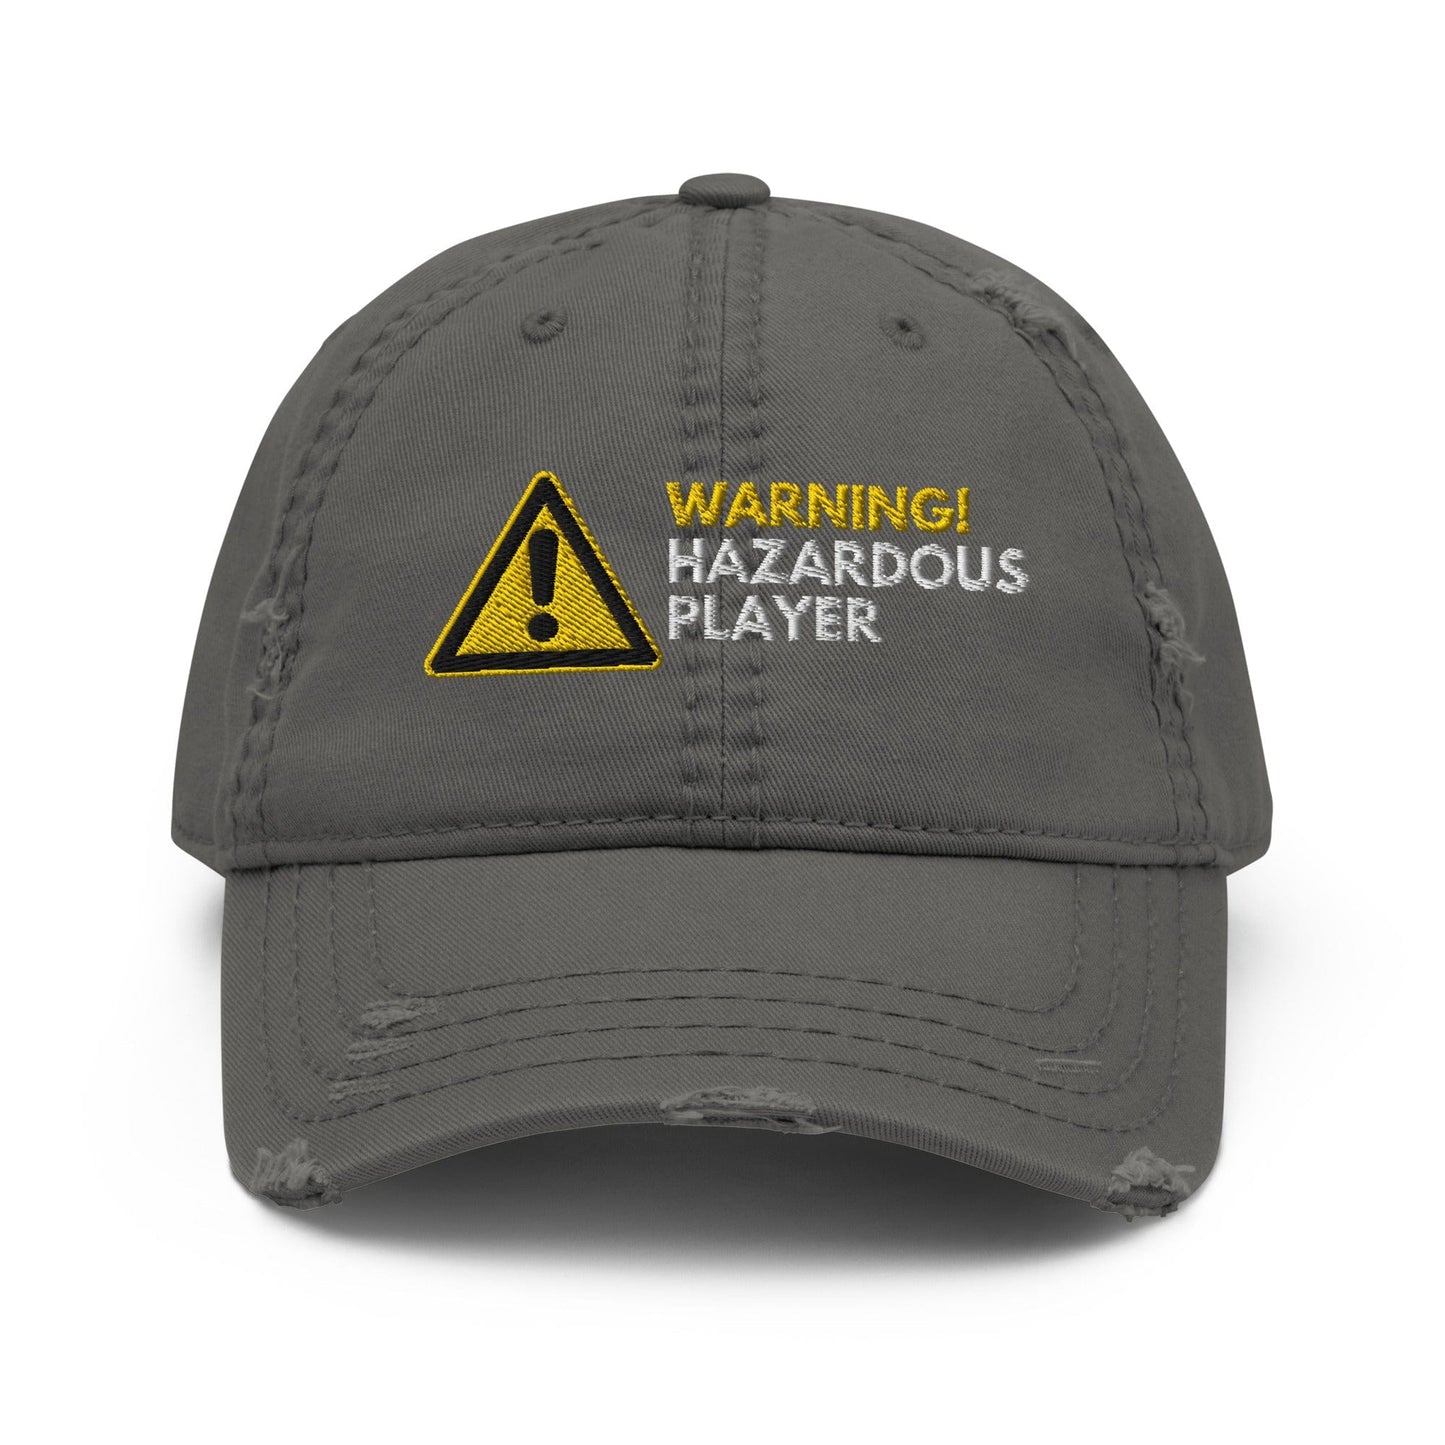 Funny Golfer Gifts  Distressed Cap Charcoal Grey Warning Hazardous Player Distressed Hat